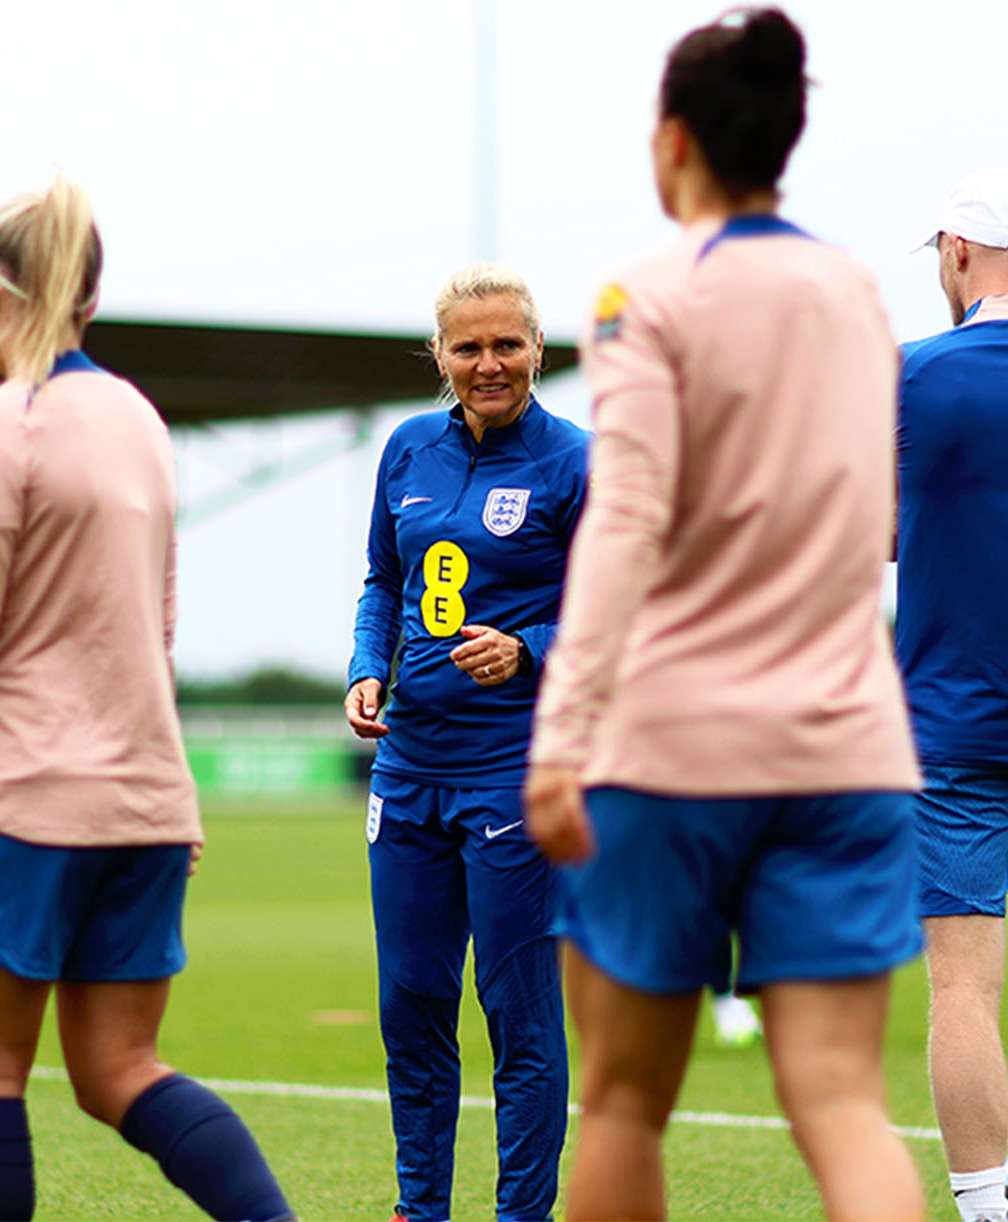 During training as players are walking onto the pitch at St. George's Park, England women’s head coach, Sarina Wiegman, slightly leans forward to listen to her assistant coach.